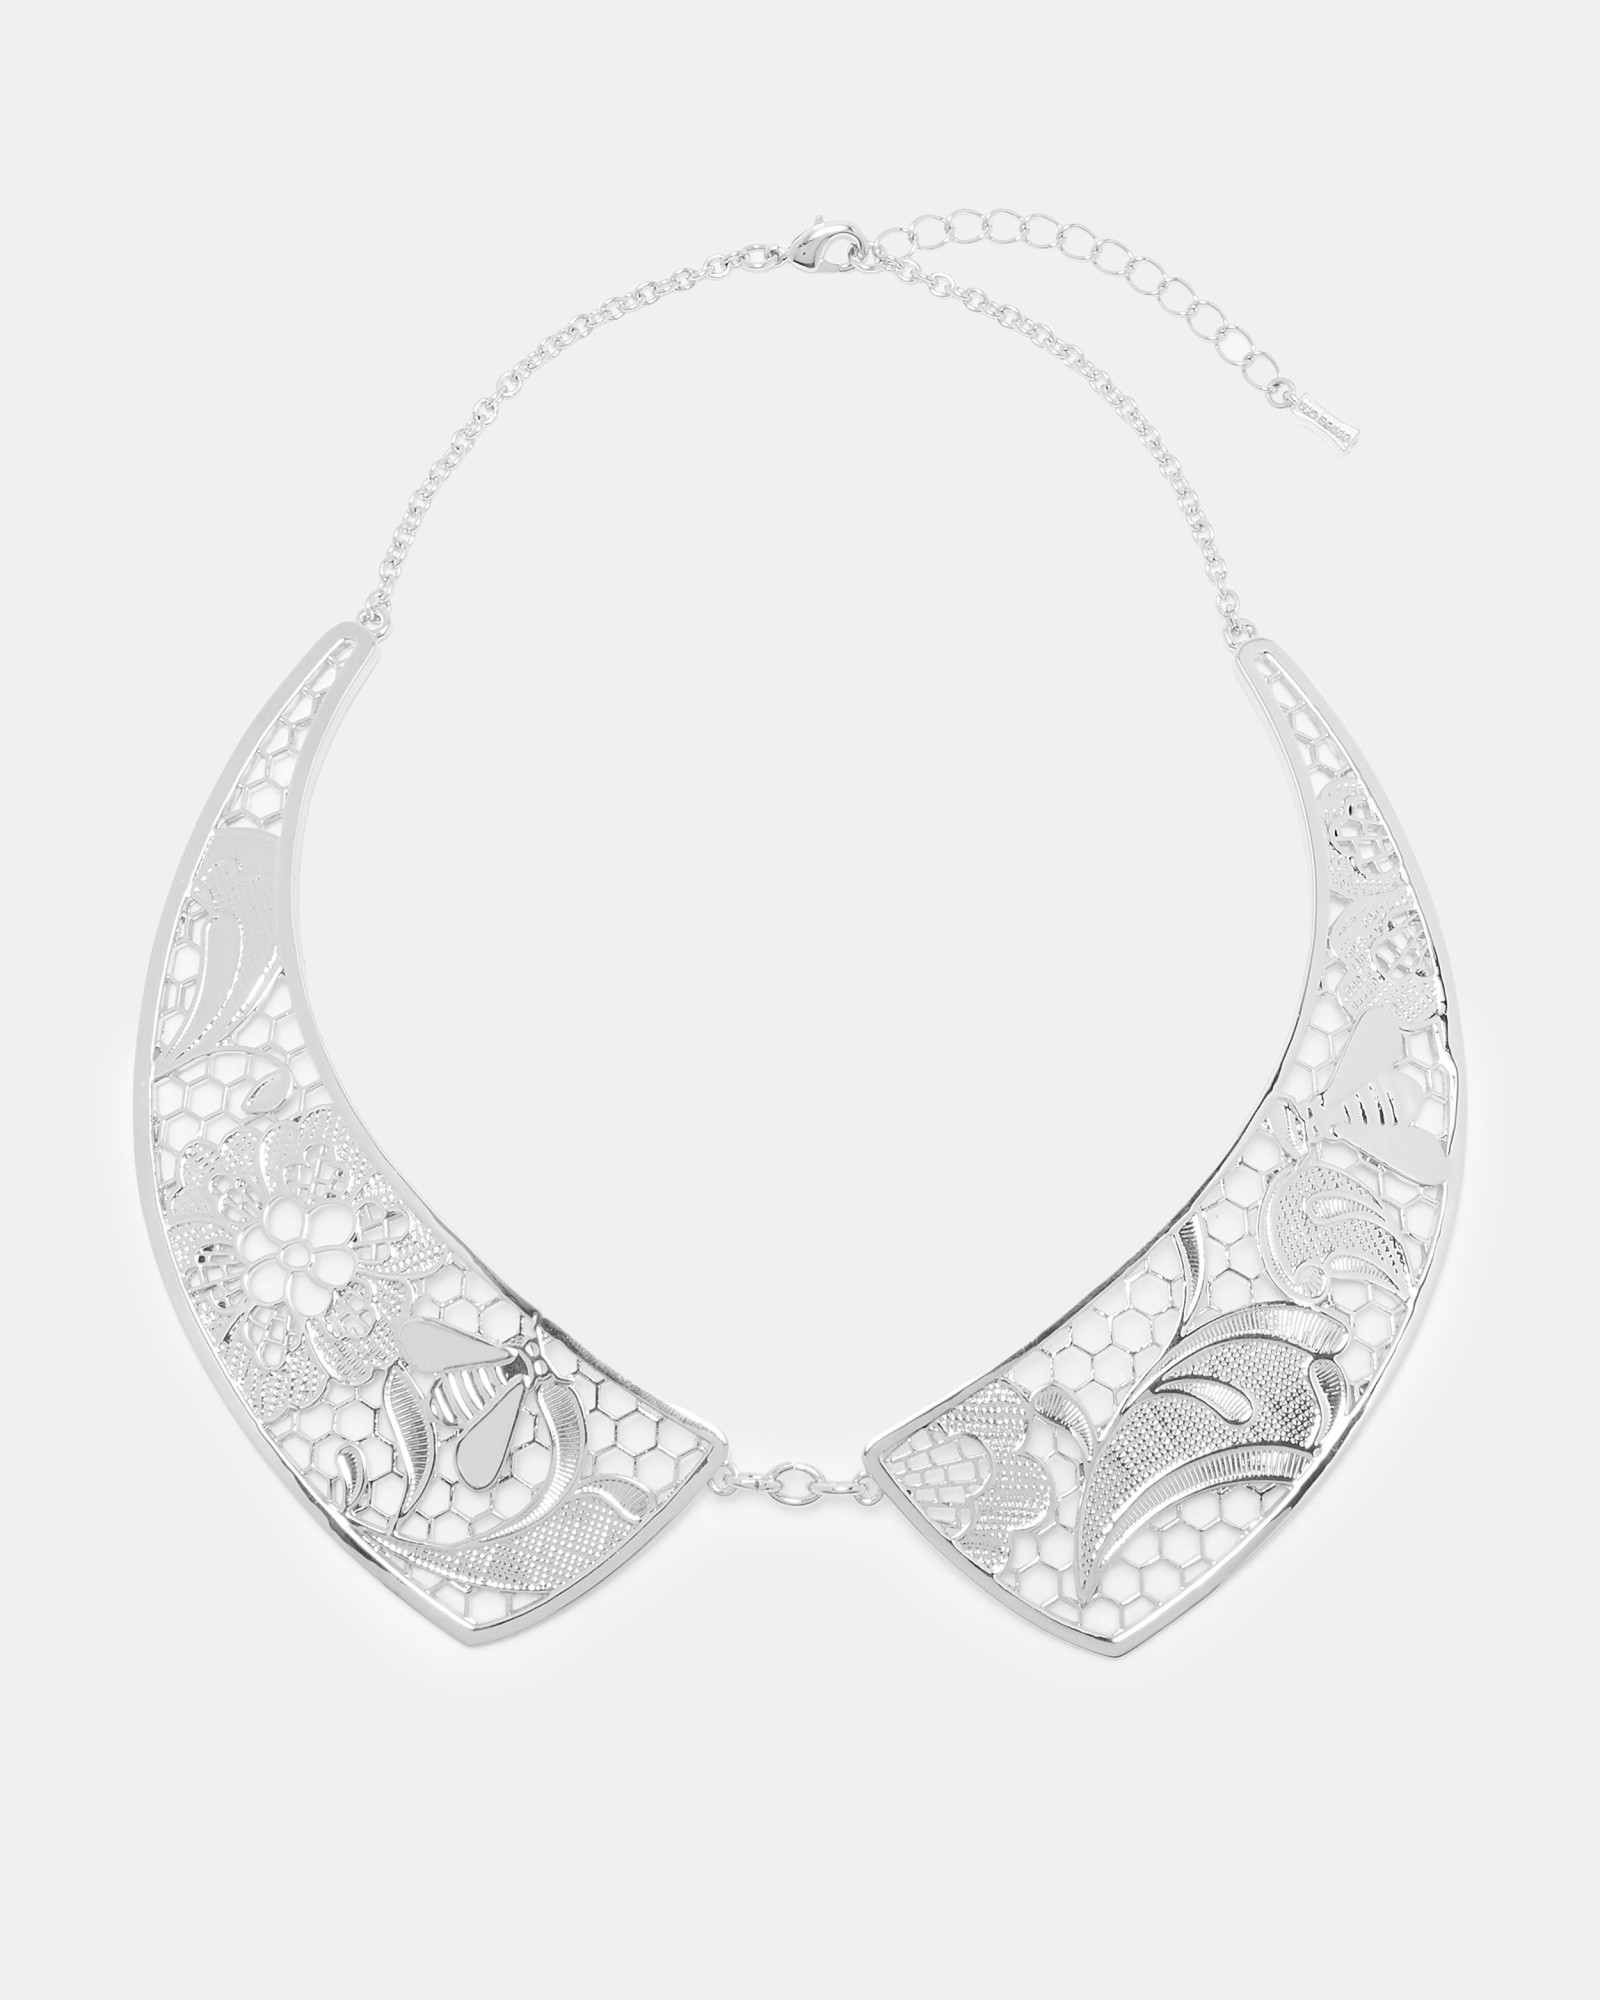 BASILIA Bumble bee lace collar necklace